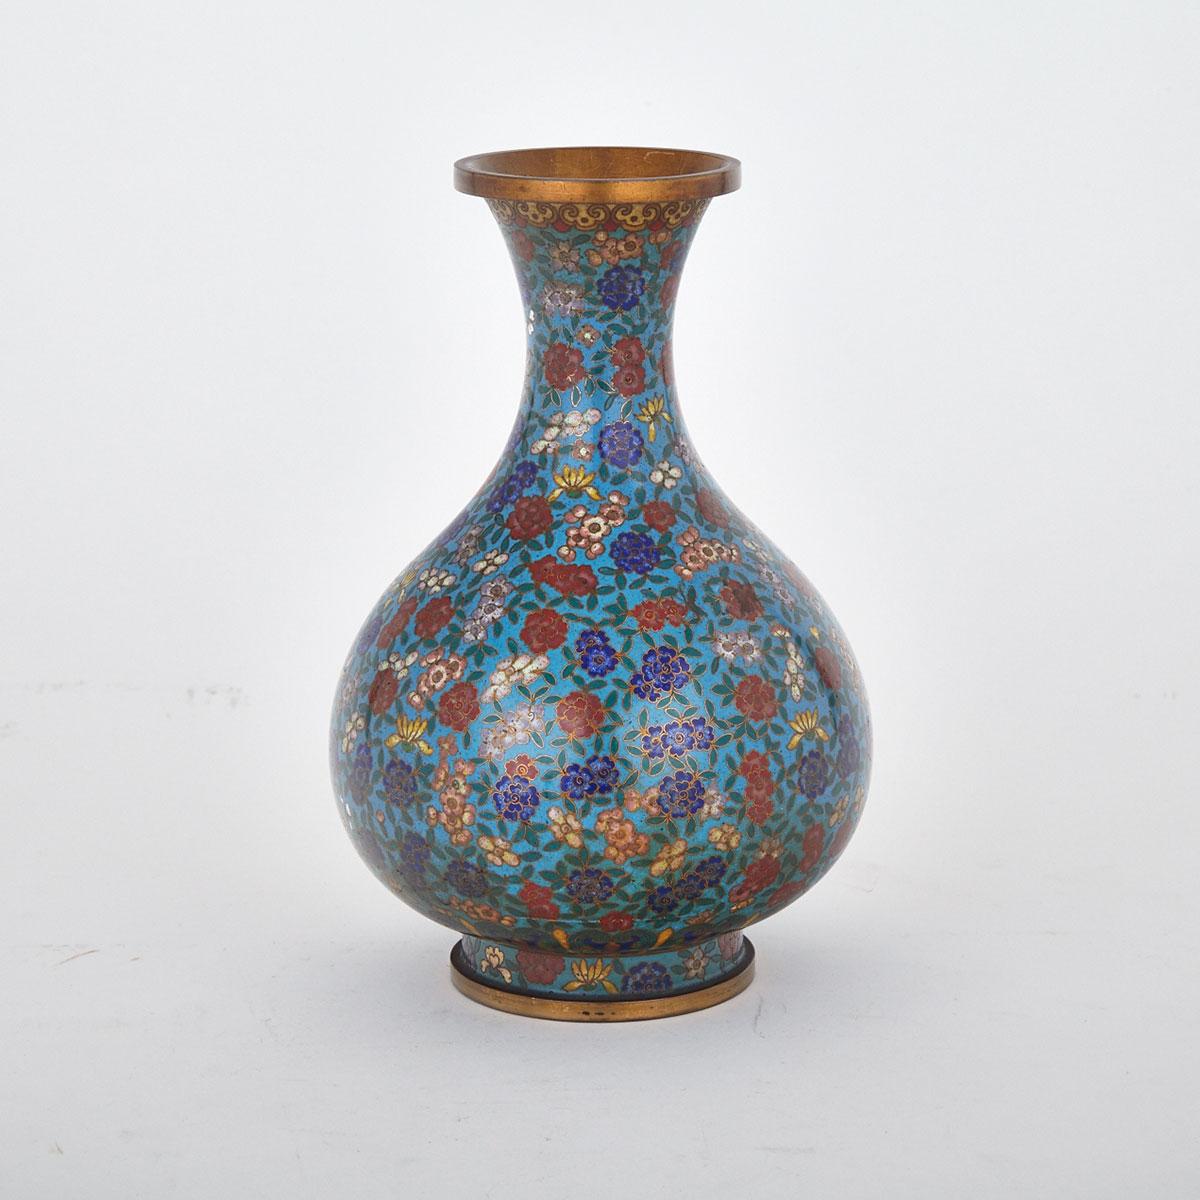 Blue Ground Cloisonné Enamel Floral Vase, Lao Tienli Mark, China, Early 20th Century